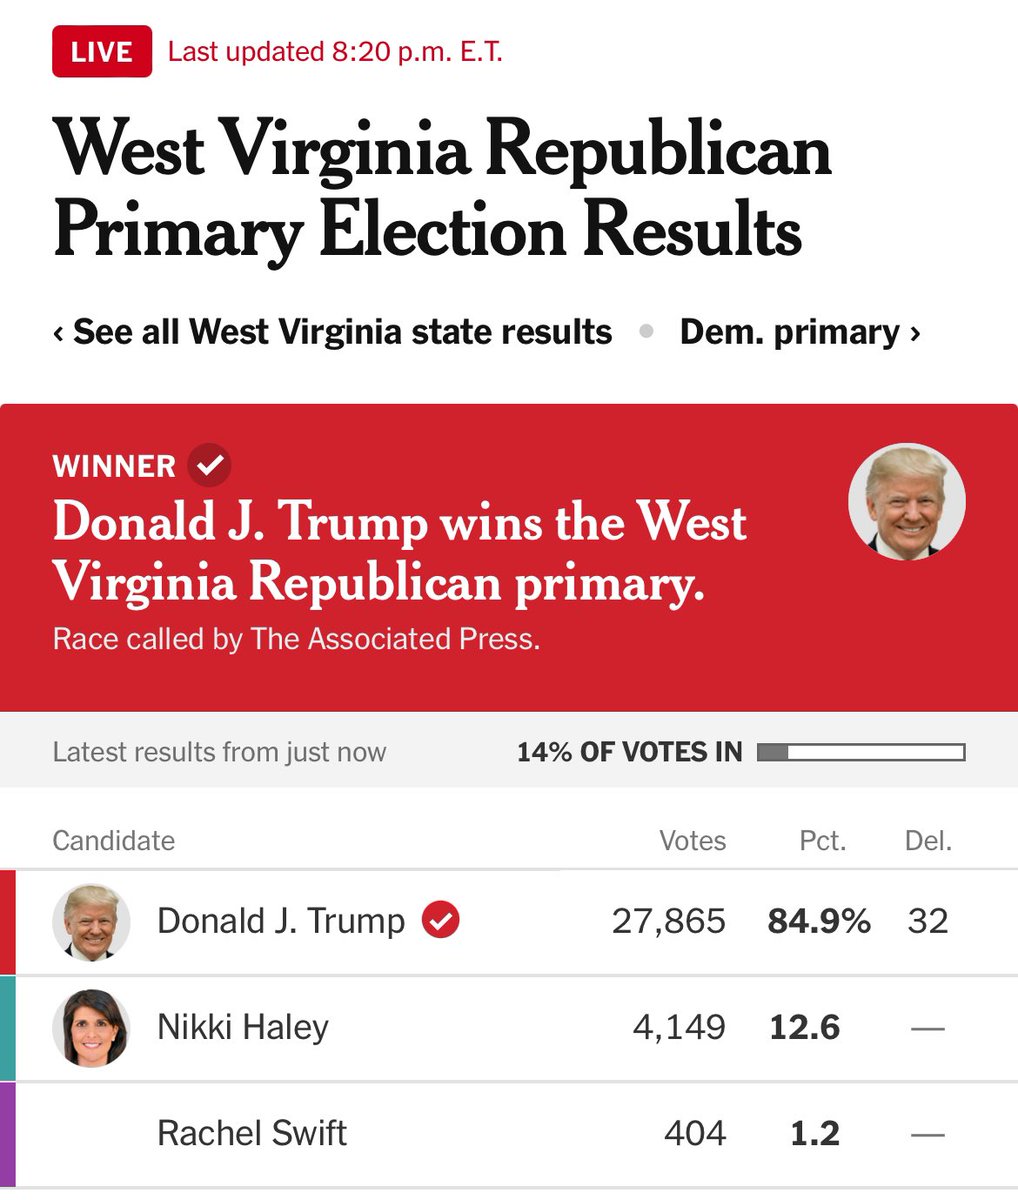 Trump is losing 12-13% of the Republican vote to Nikki Haley in WEST VIRGINIA. 

This trend can’t be ignored anymore: across every primary with real votes (not polls) Trump is having trouble unifying the party.